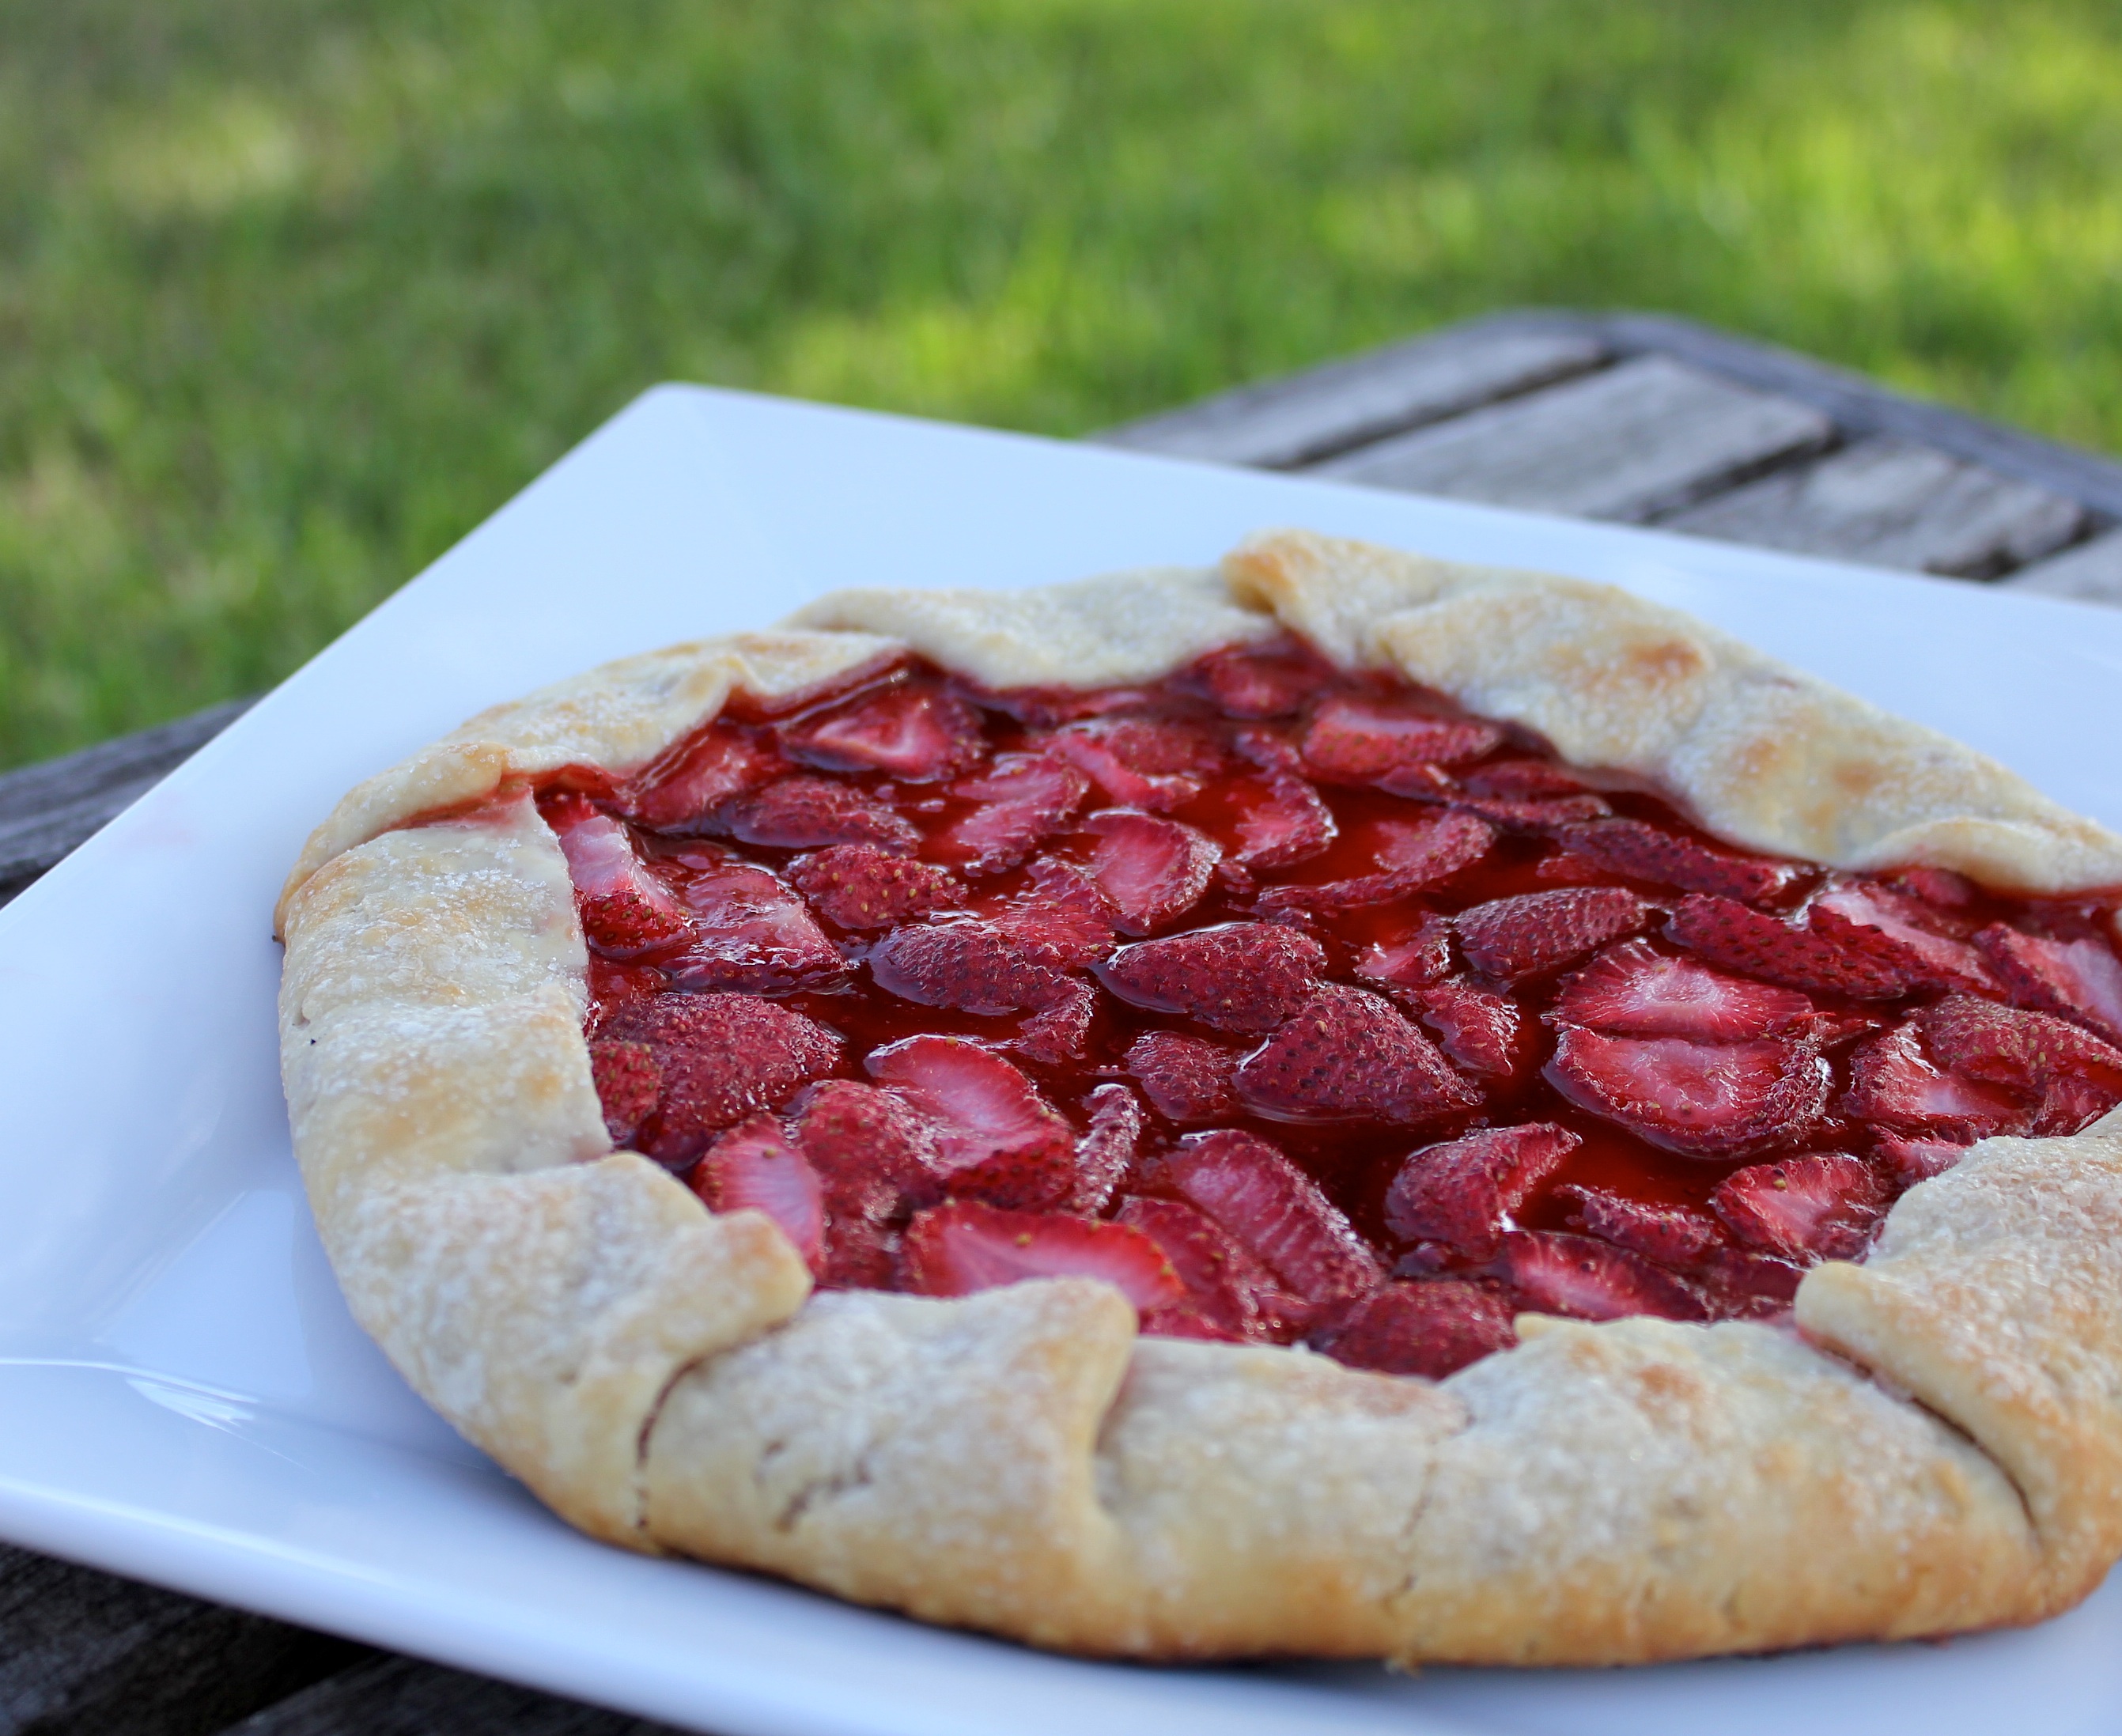 Grilled Strawberry Galette – A Simple Barbequed Dessert Recipe